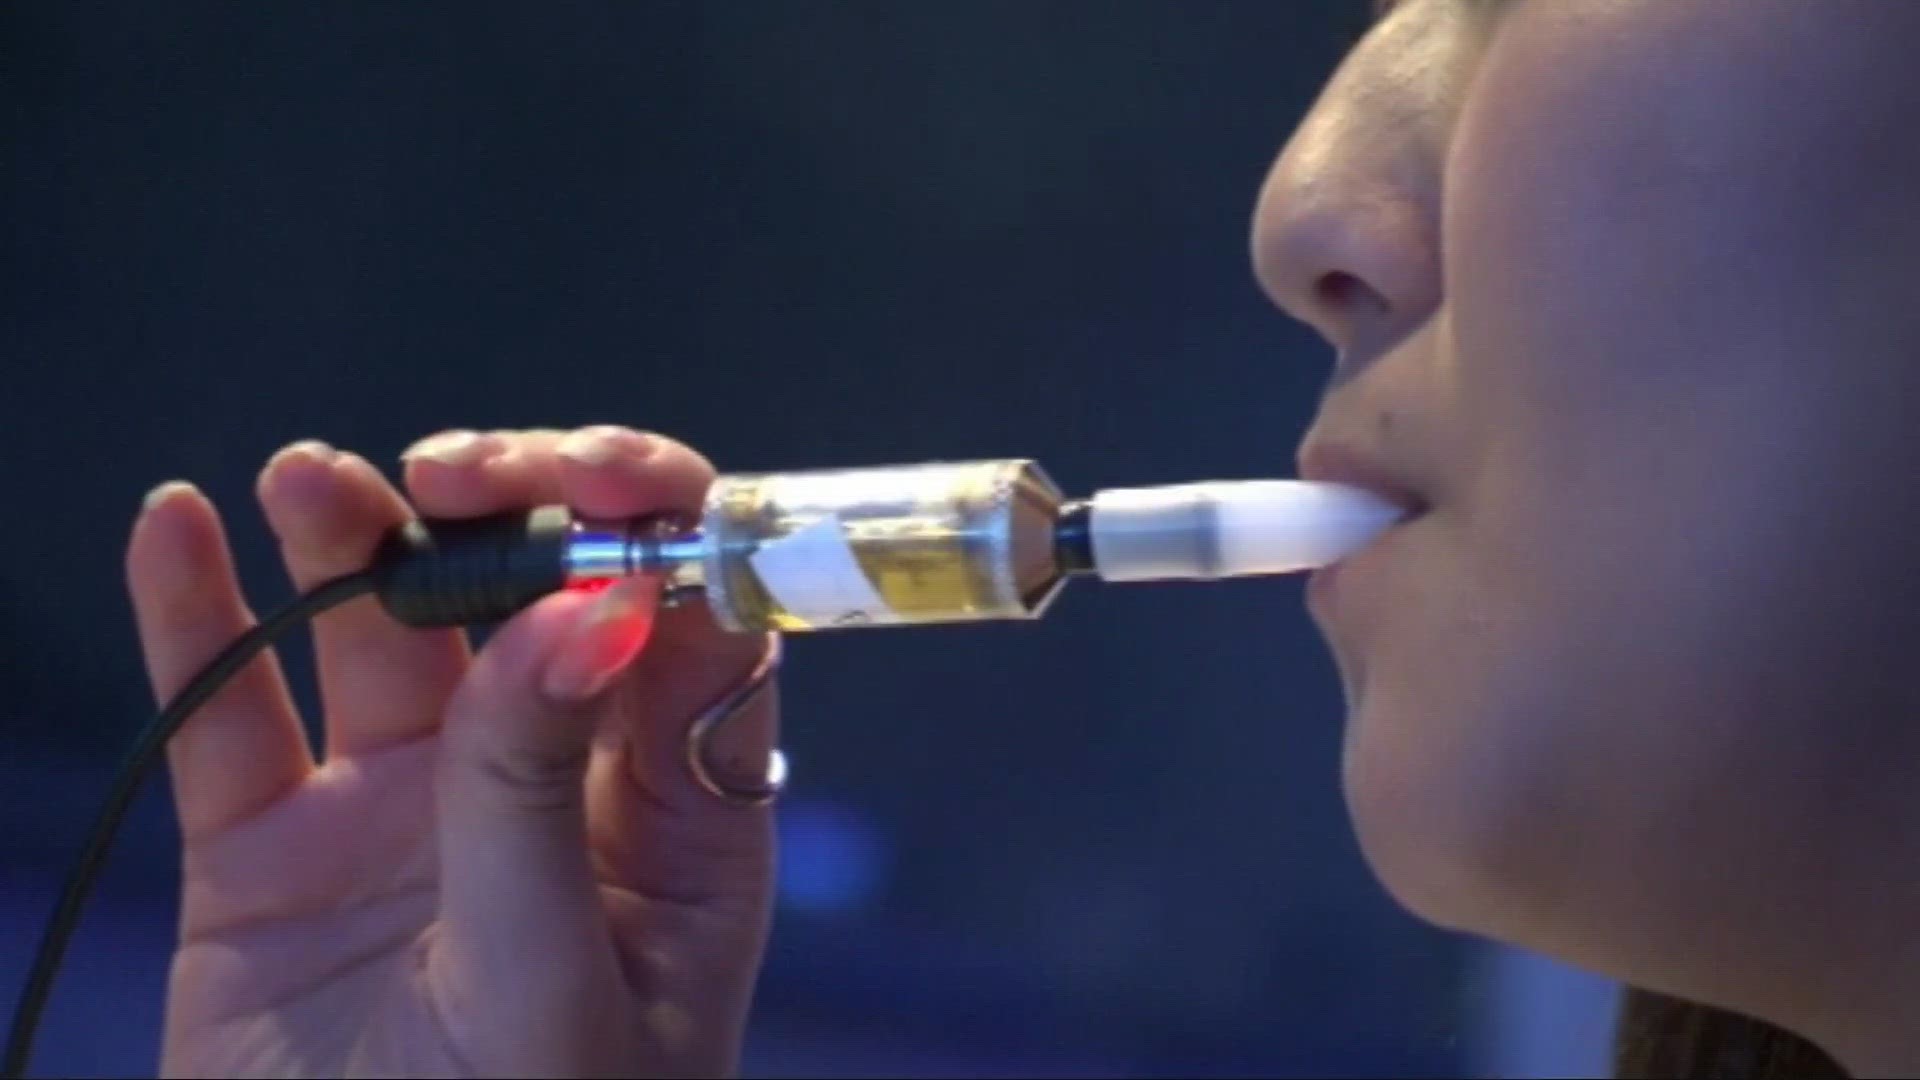 In early February, an emergency ordinance was introduced before Cleveland City council that would ban the sale of flavored tobacco products and require licenses.